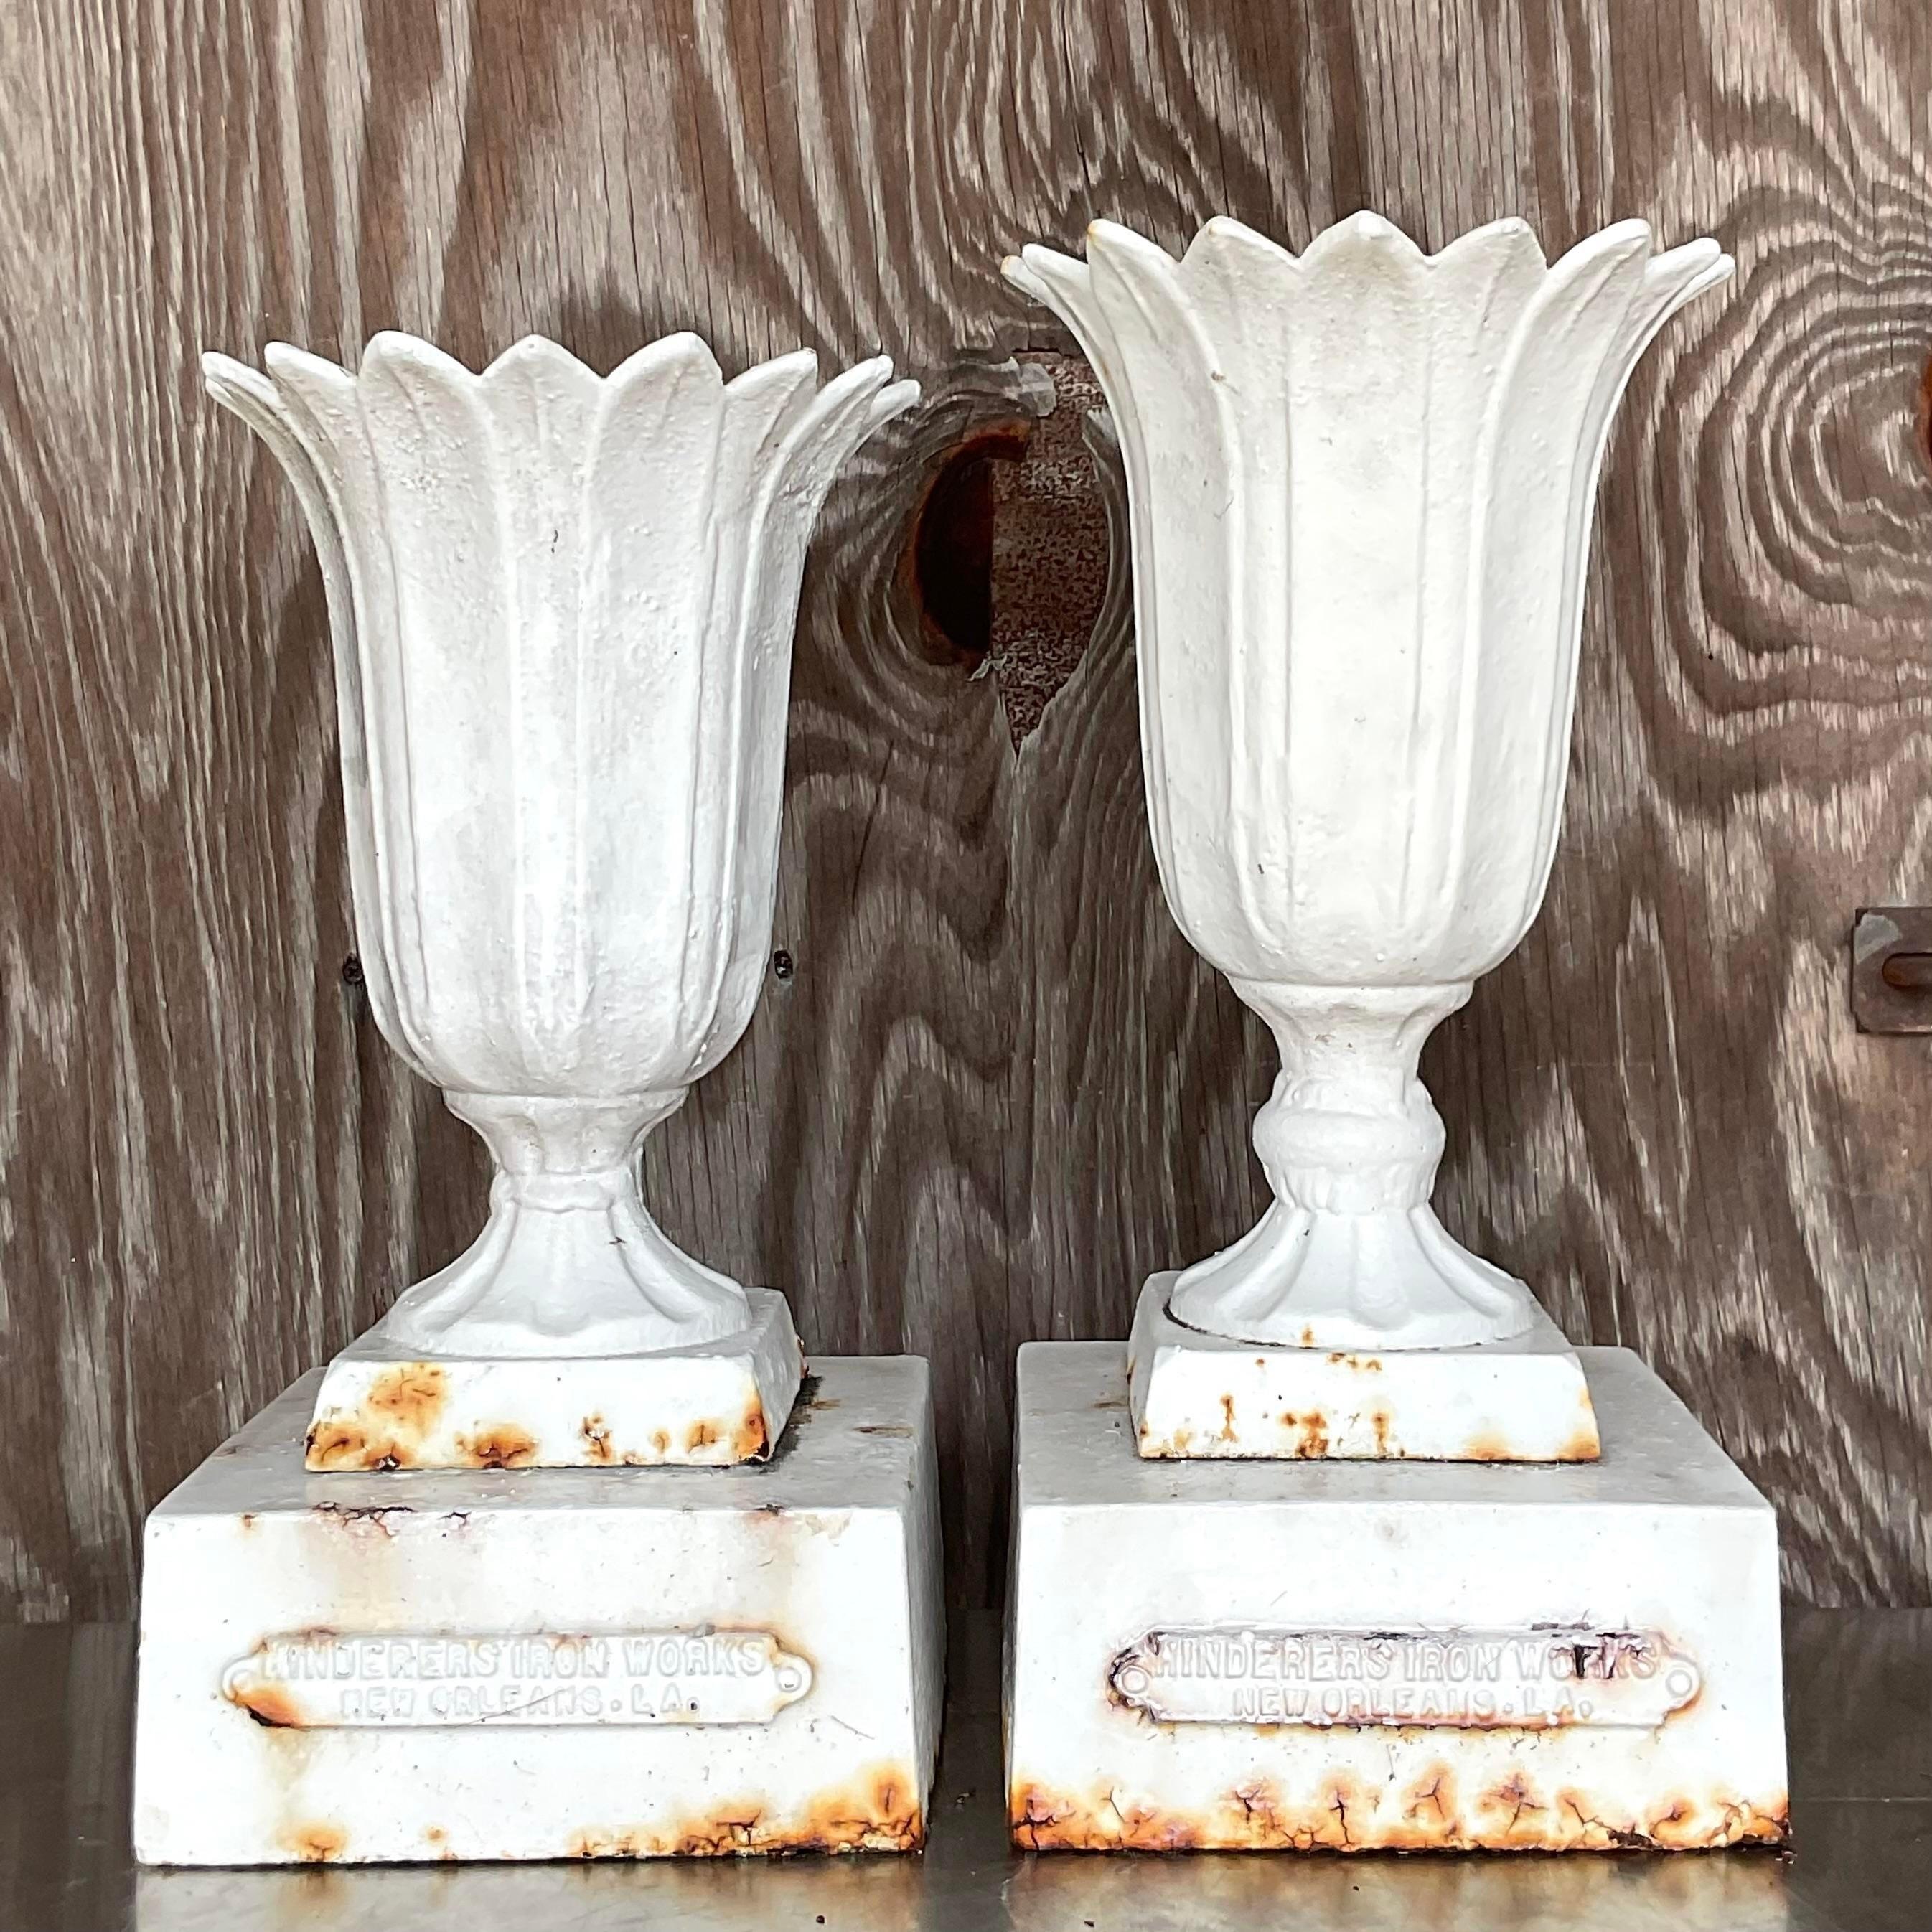 A fabulous set of two vintage urns. Made from a heavy case iron and painted white. An all over patinated rusty finish from time. Made by the Hinderson group in New Orleans and marked on each urn. Acquired from a Palm Beach estate.

Lower urn is